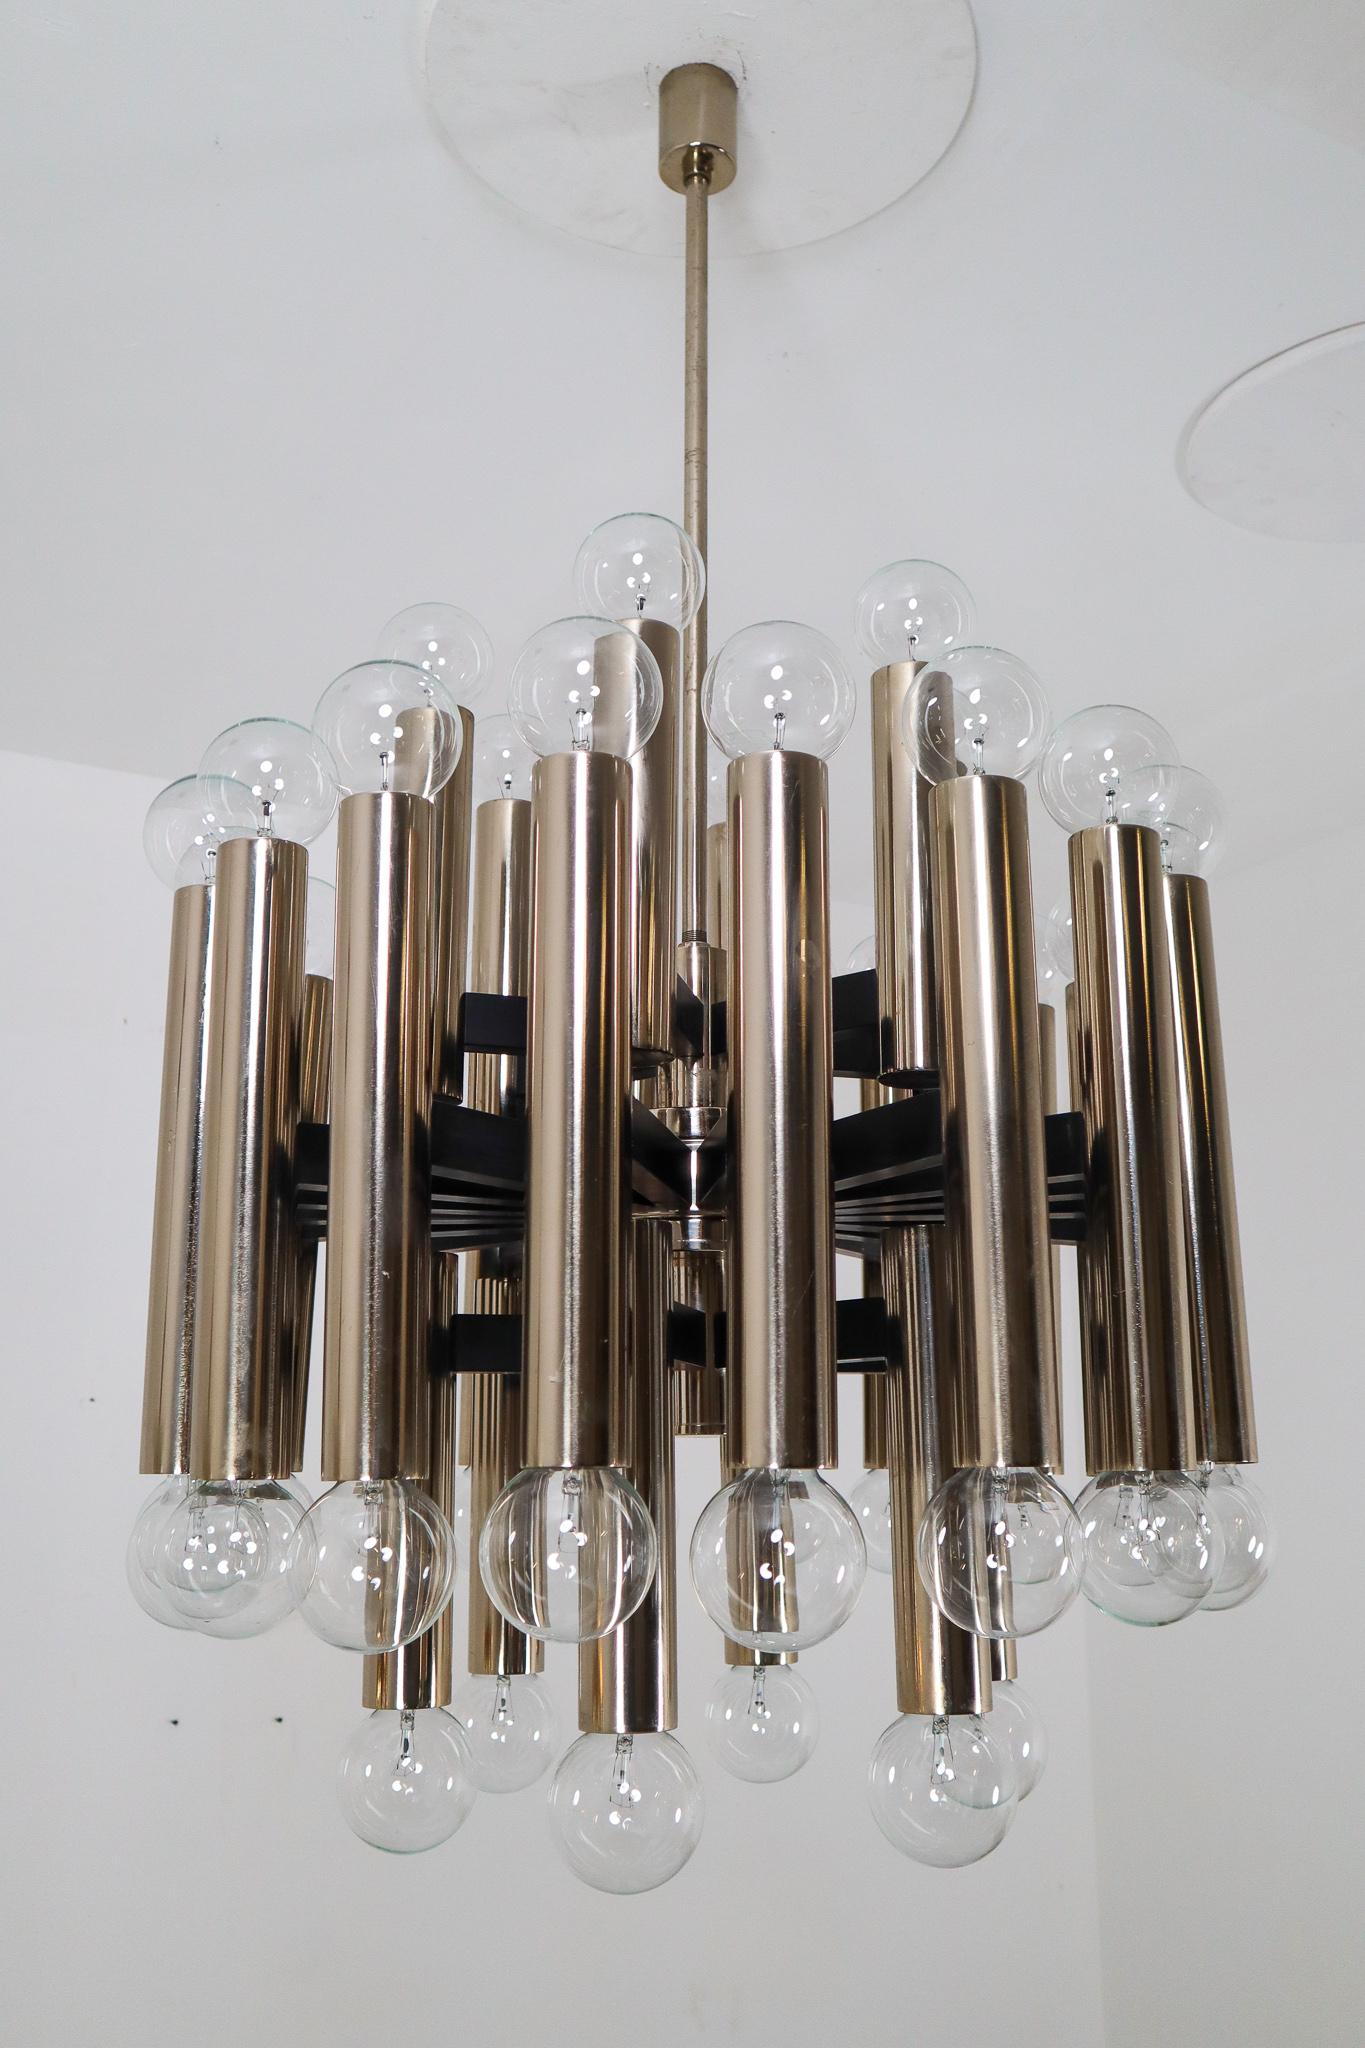 Mid-Century Modernist extreme large chandelier with 48-light bulbs. The fixture is made of metal with a steel-brass patina. Therefore an interesting color is visible on the metal. 48 large light bulbs are placed over four levels. A warm and diffuse